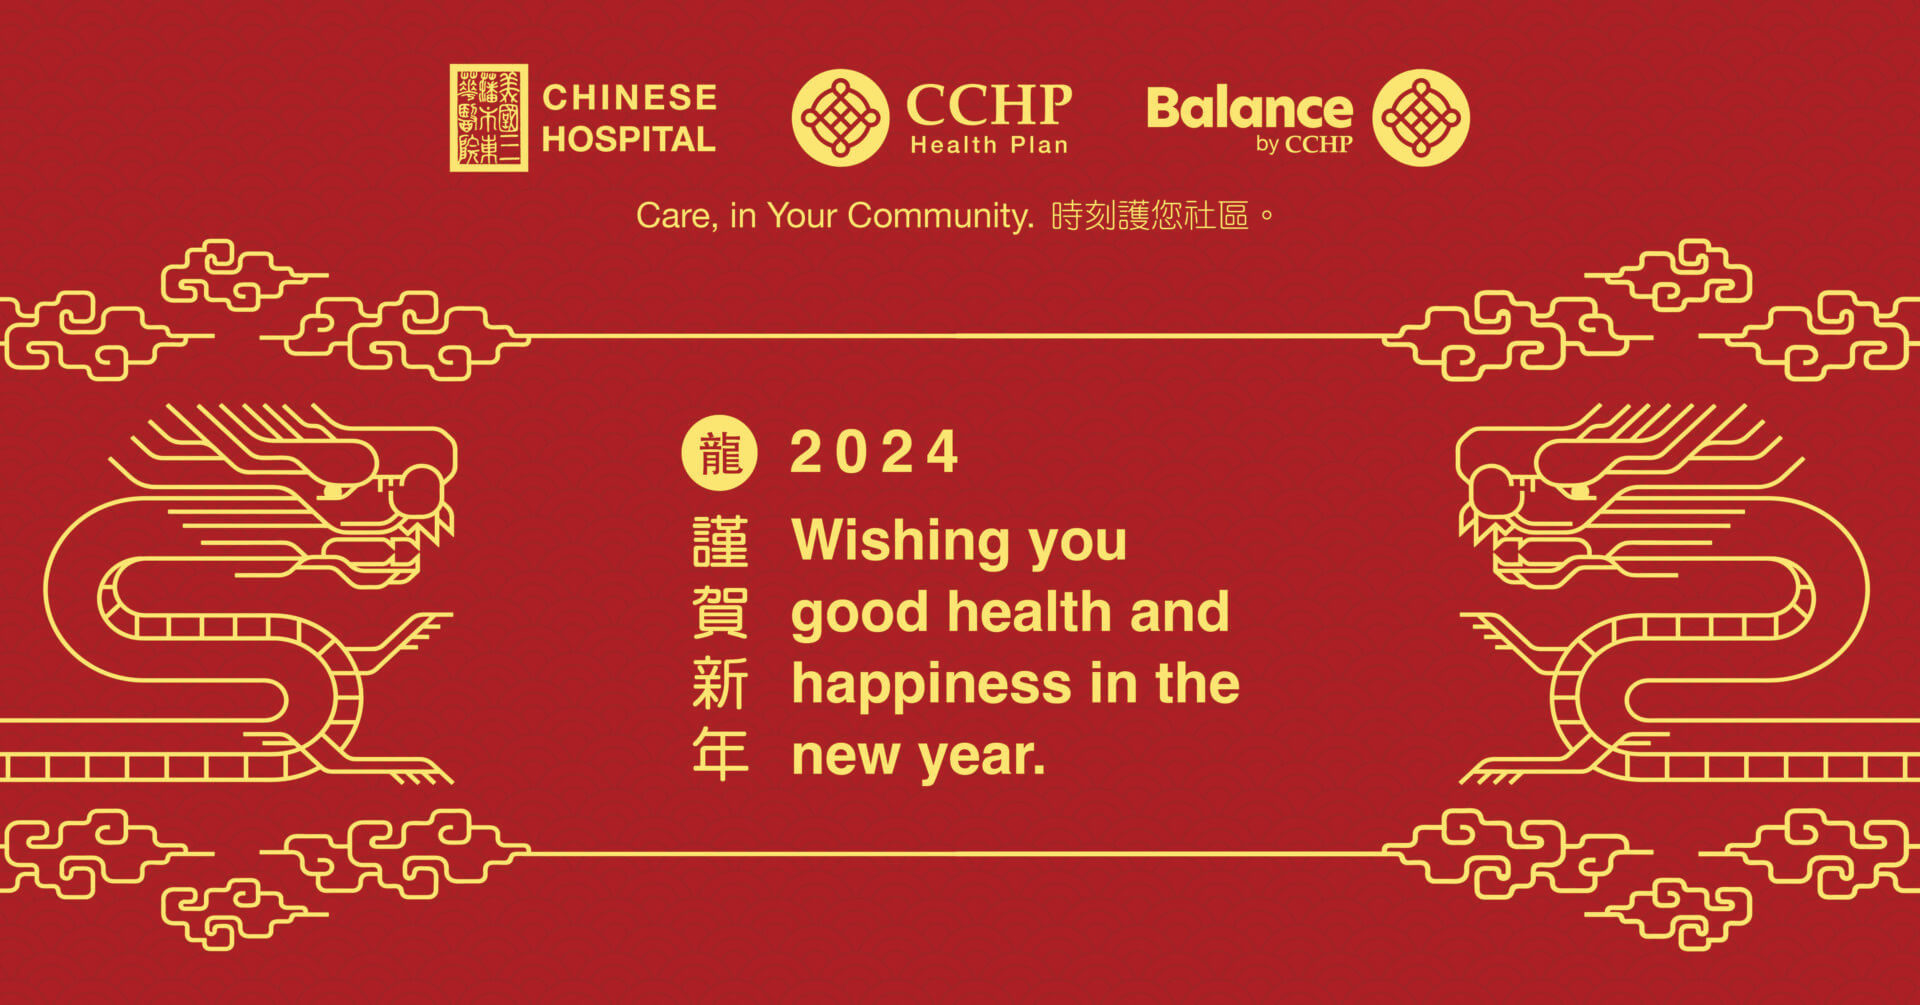 Join us in the community to celebrate Lunar New Year!